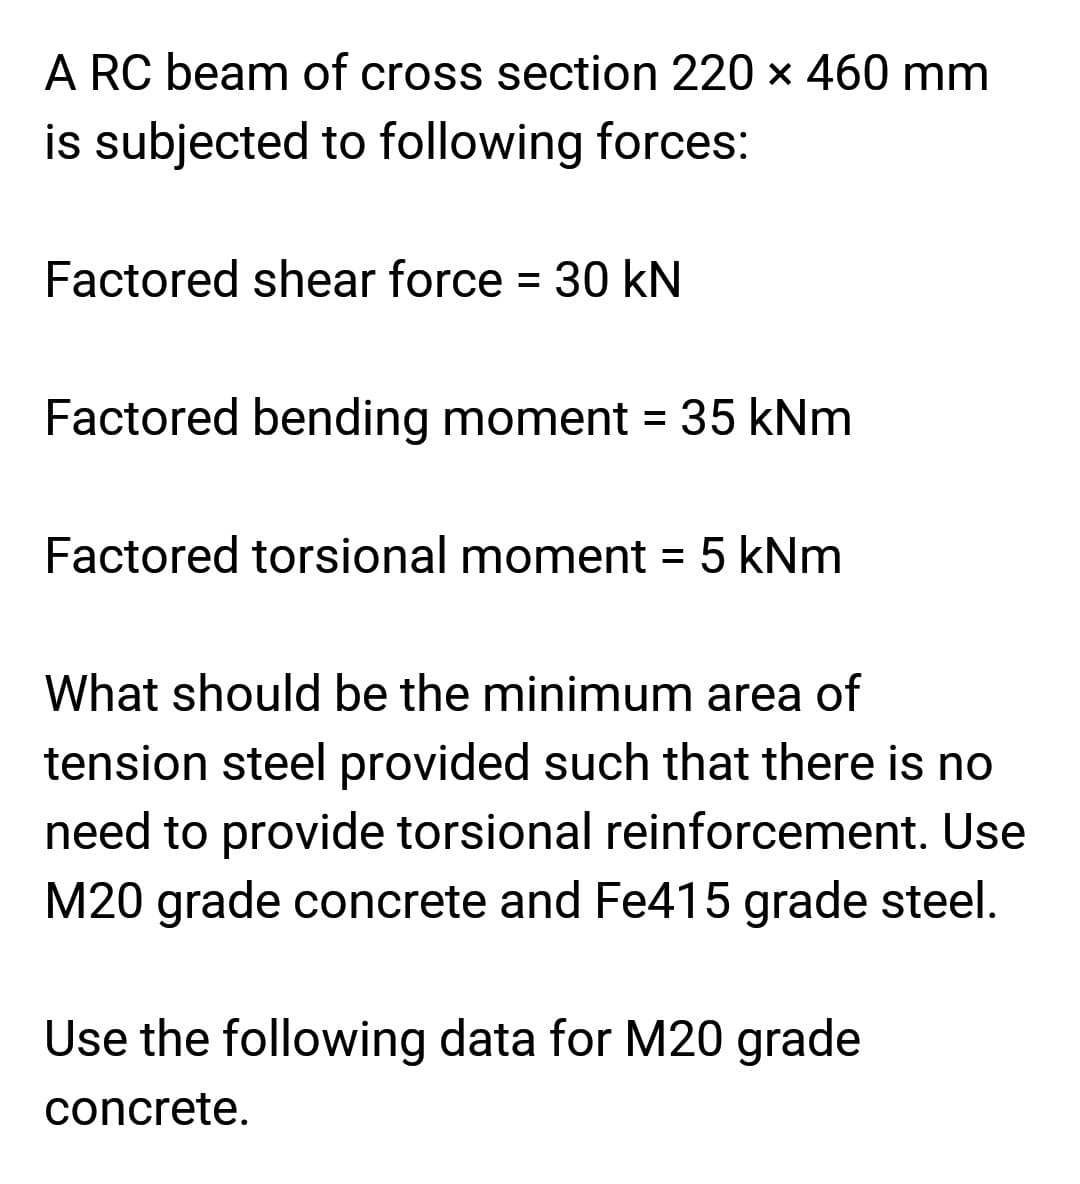 A RC beam of cross section 220 x 460 mm
is subjected to following forces:
Factored shear force = 30 kN
Factored bending moment = 35 kNm
Factored torsional moment = 5 kNm
What should be the minimum area of
tension steel provided such that there is no
need to provide torsional reinforcement. Use
M20 grade concrete and Fe415 grade steel.
Use the following data for M20 grade
concrete.